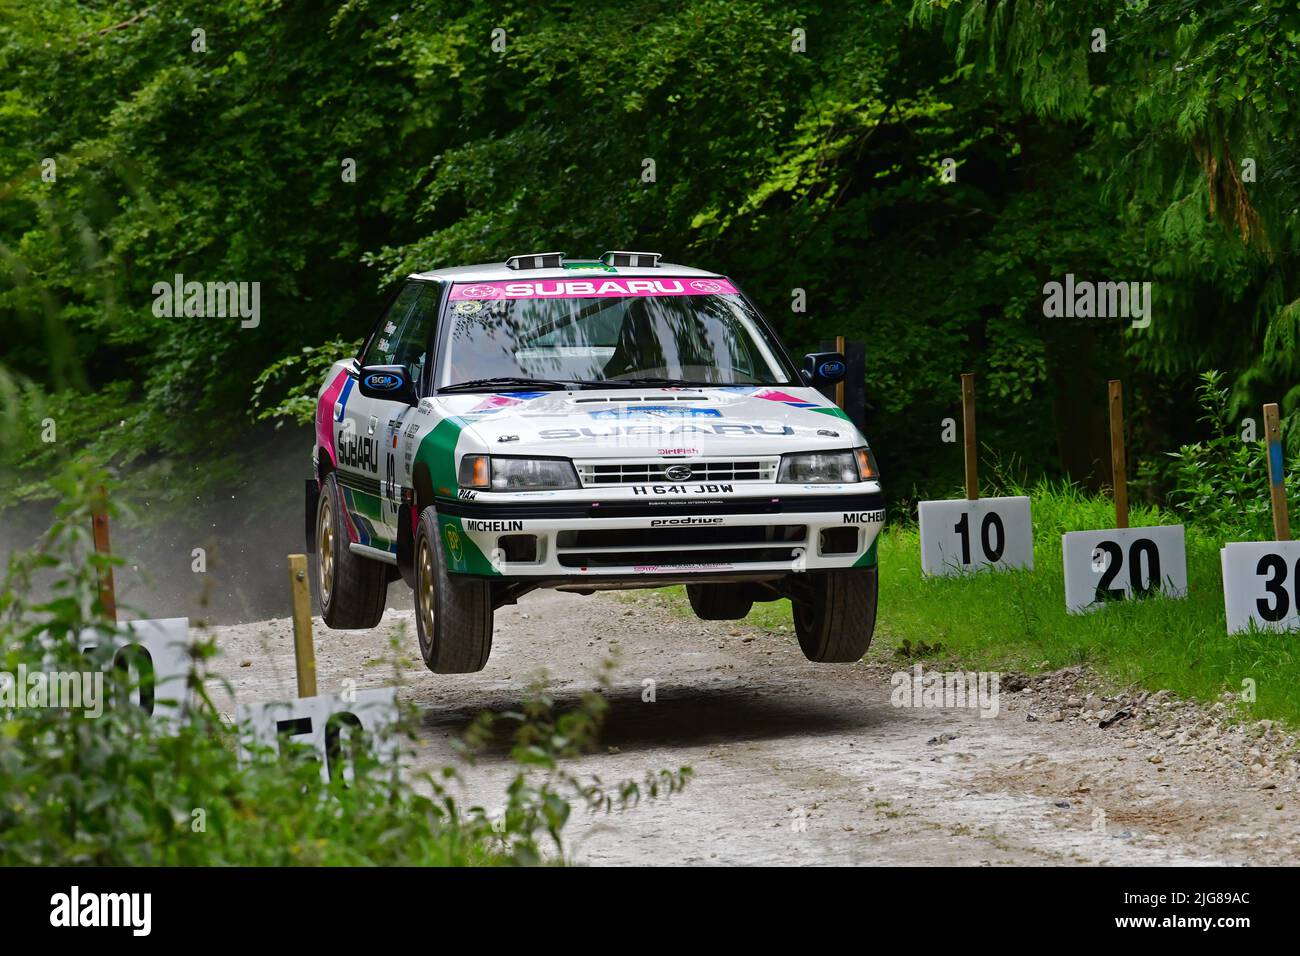 Airbourne at the Flying Finn, Alister McRae, Subaru Legacy RS, Dawn of Modern Rallying, Forest Rally Stage, Goodwood Festival of Speed, The Innovators Stock Photo